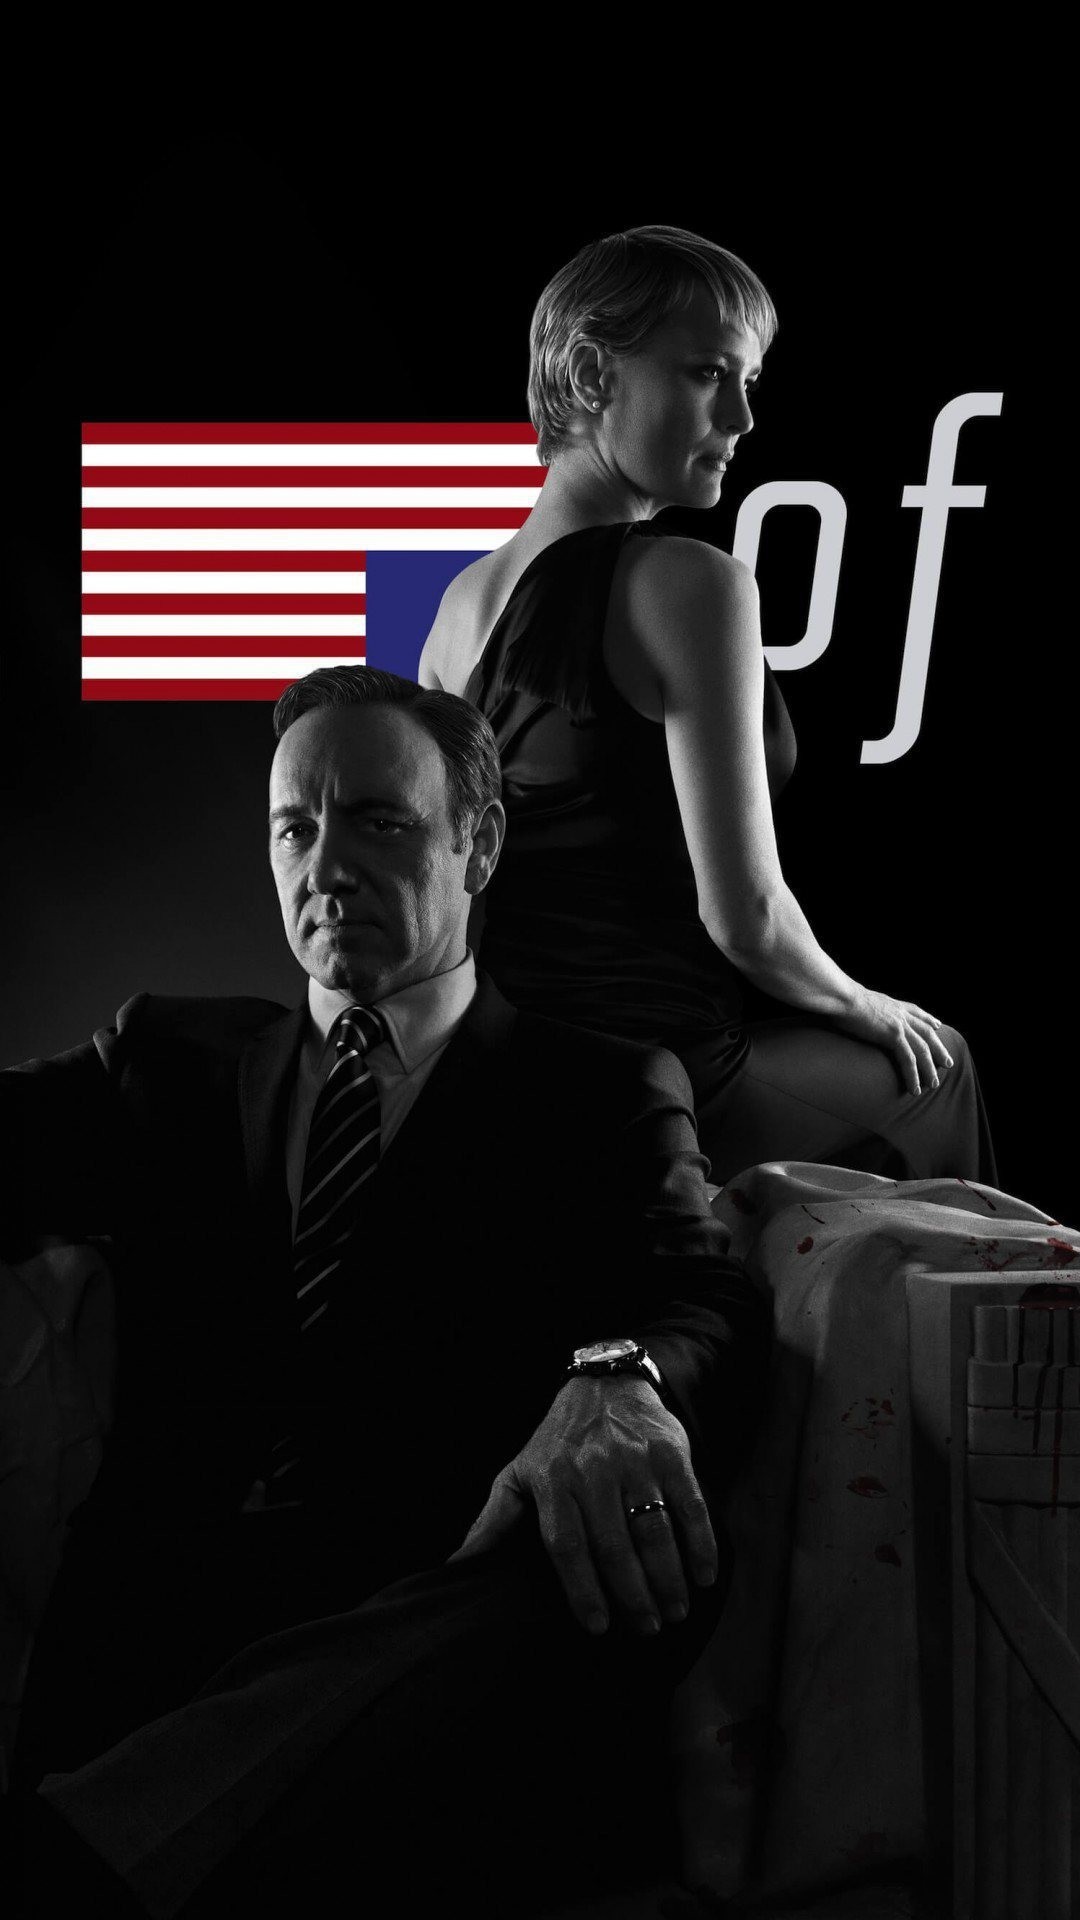 Frank And Claire With The American Flag - House Of Cards , HD Wallpaper & Backgrounds